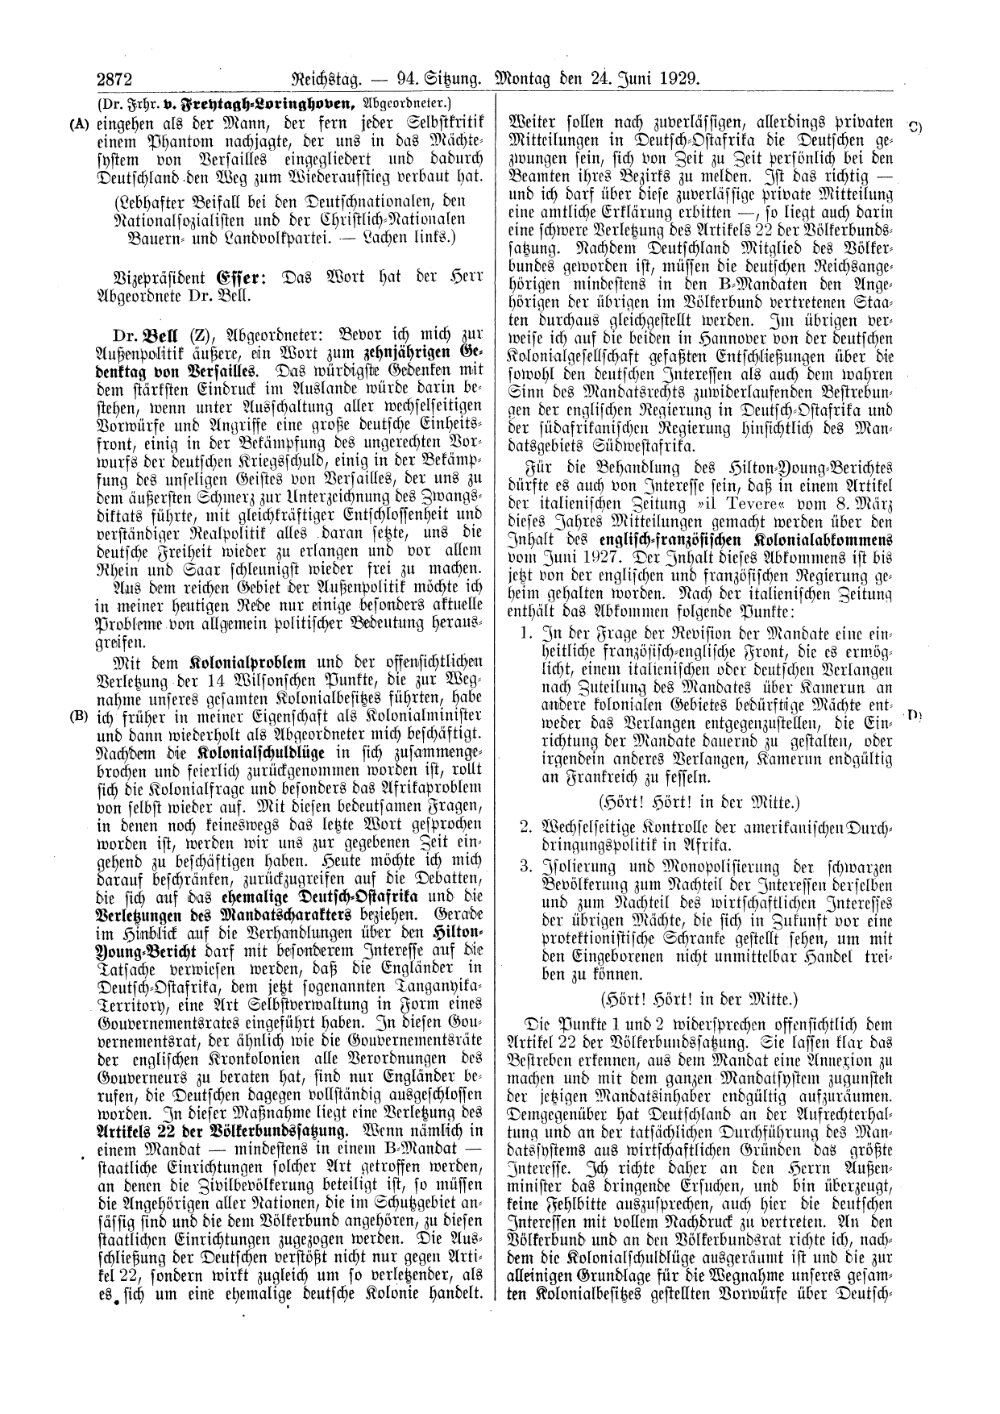 Scan of page 2872